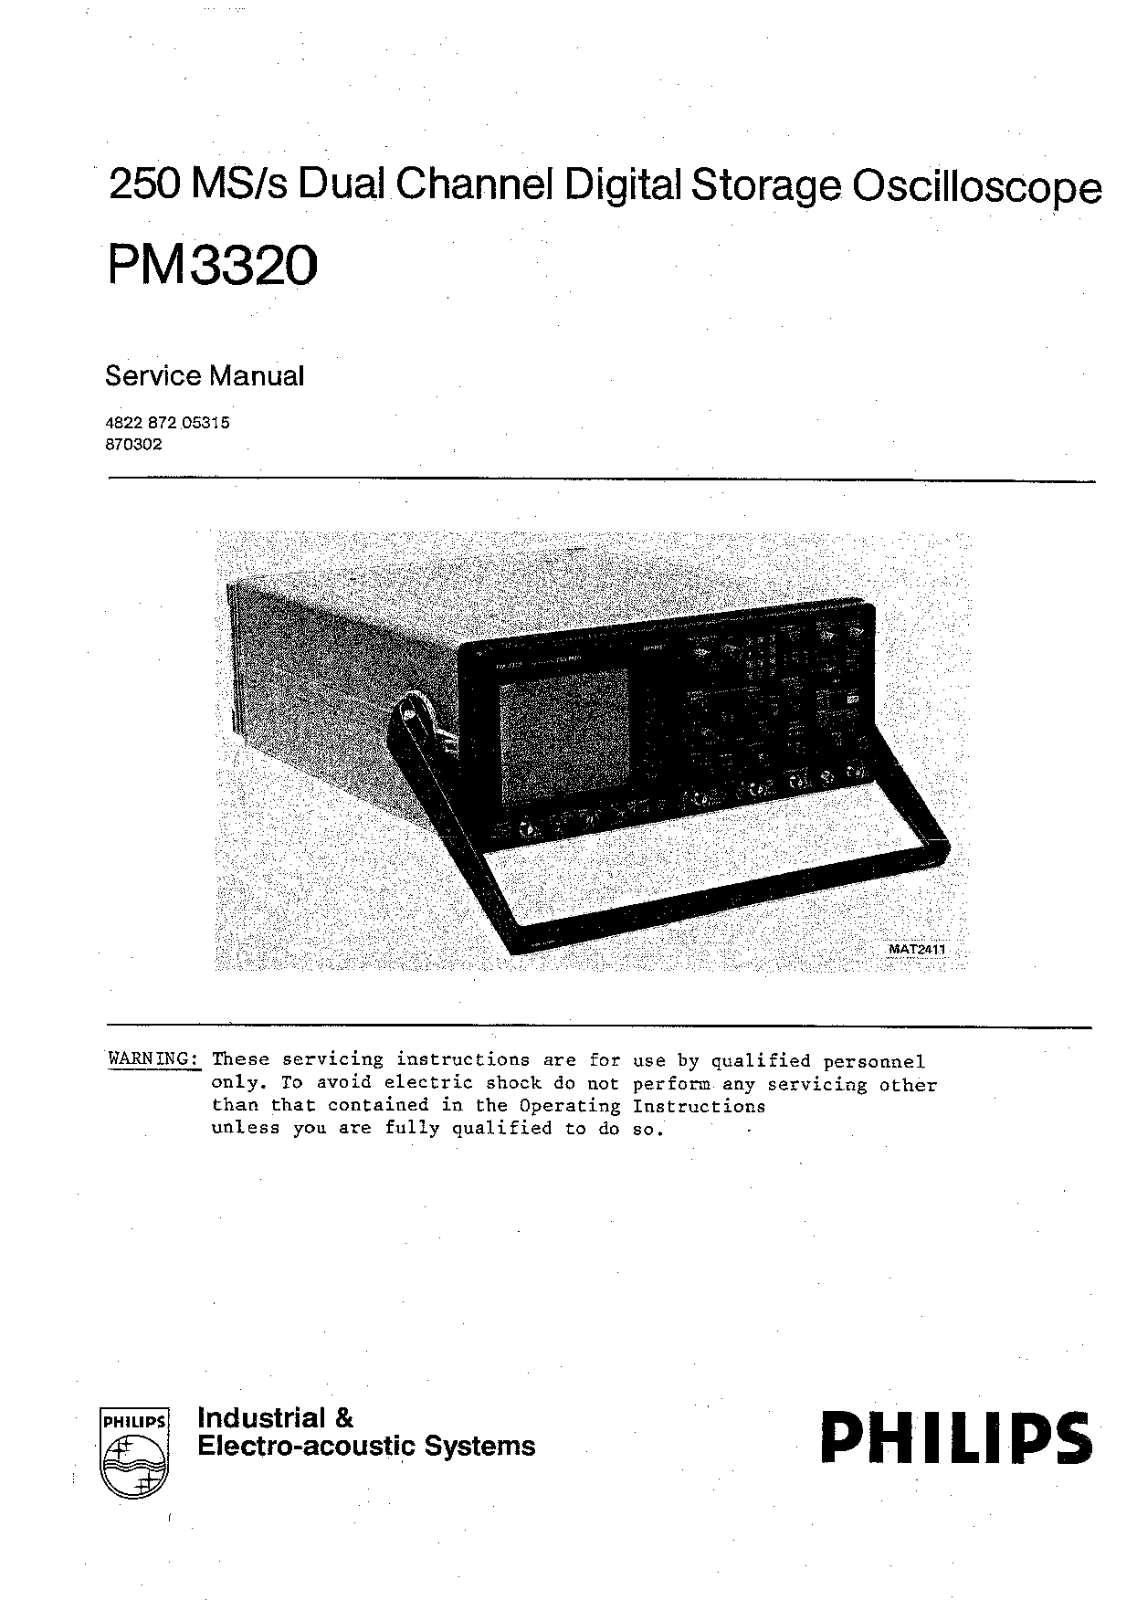 Philips PM-3320 Service Manual